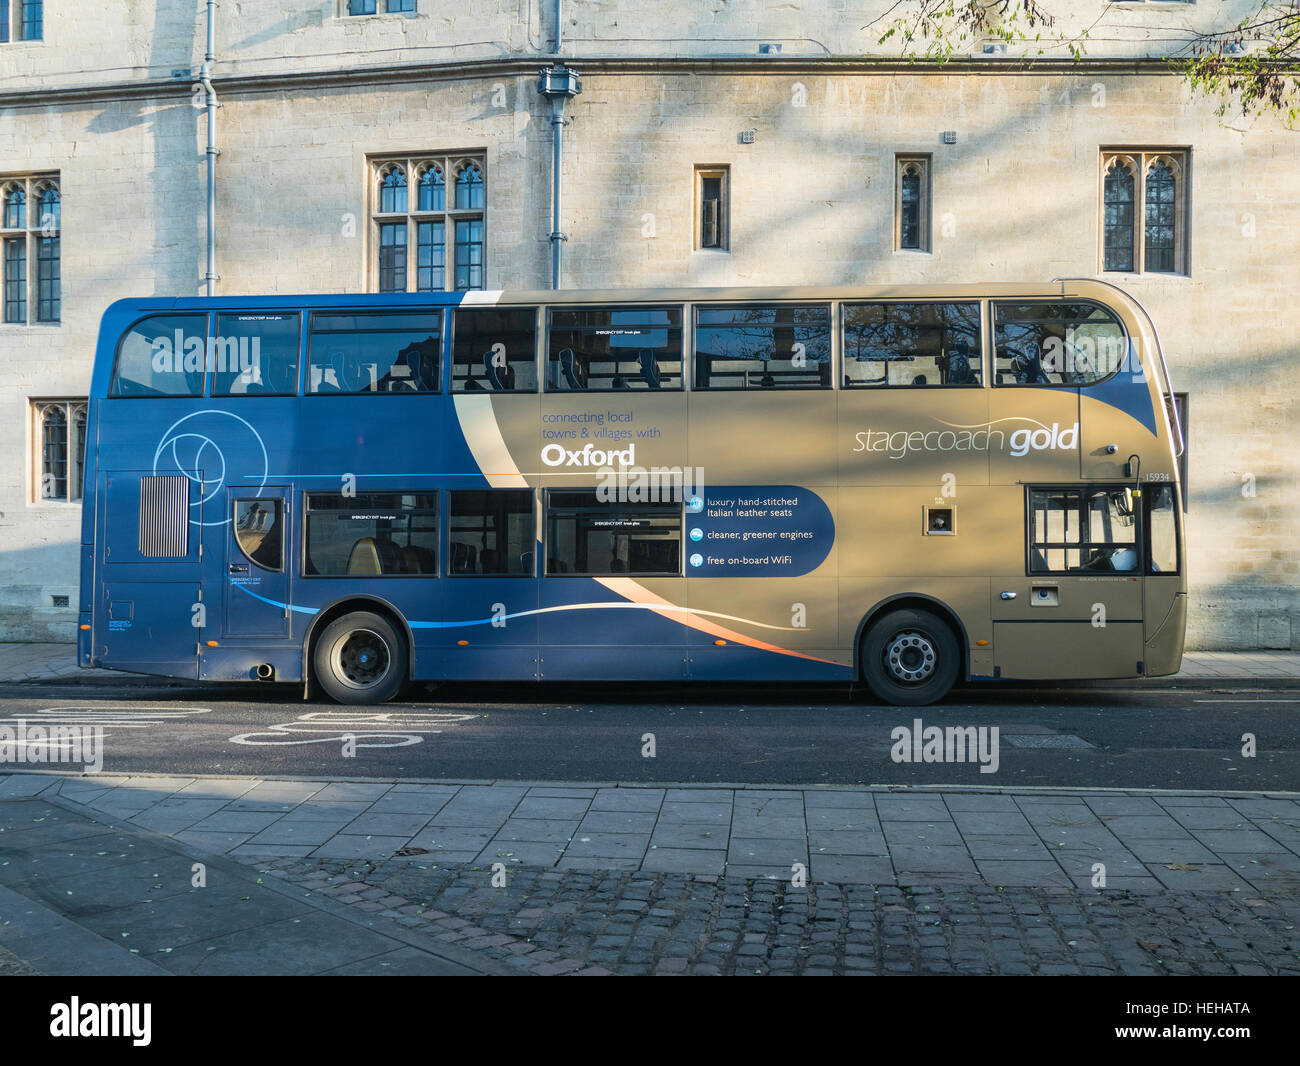 Stagecoach Gold bus waiting in St Giles, Oxford, England UK Stock Photo